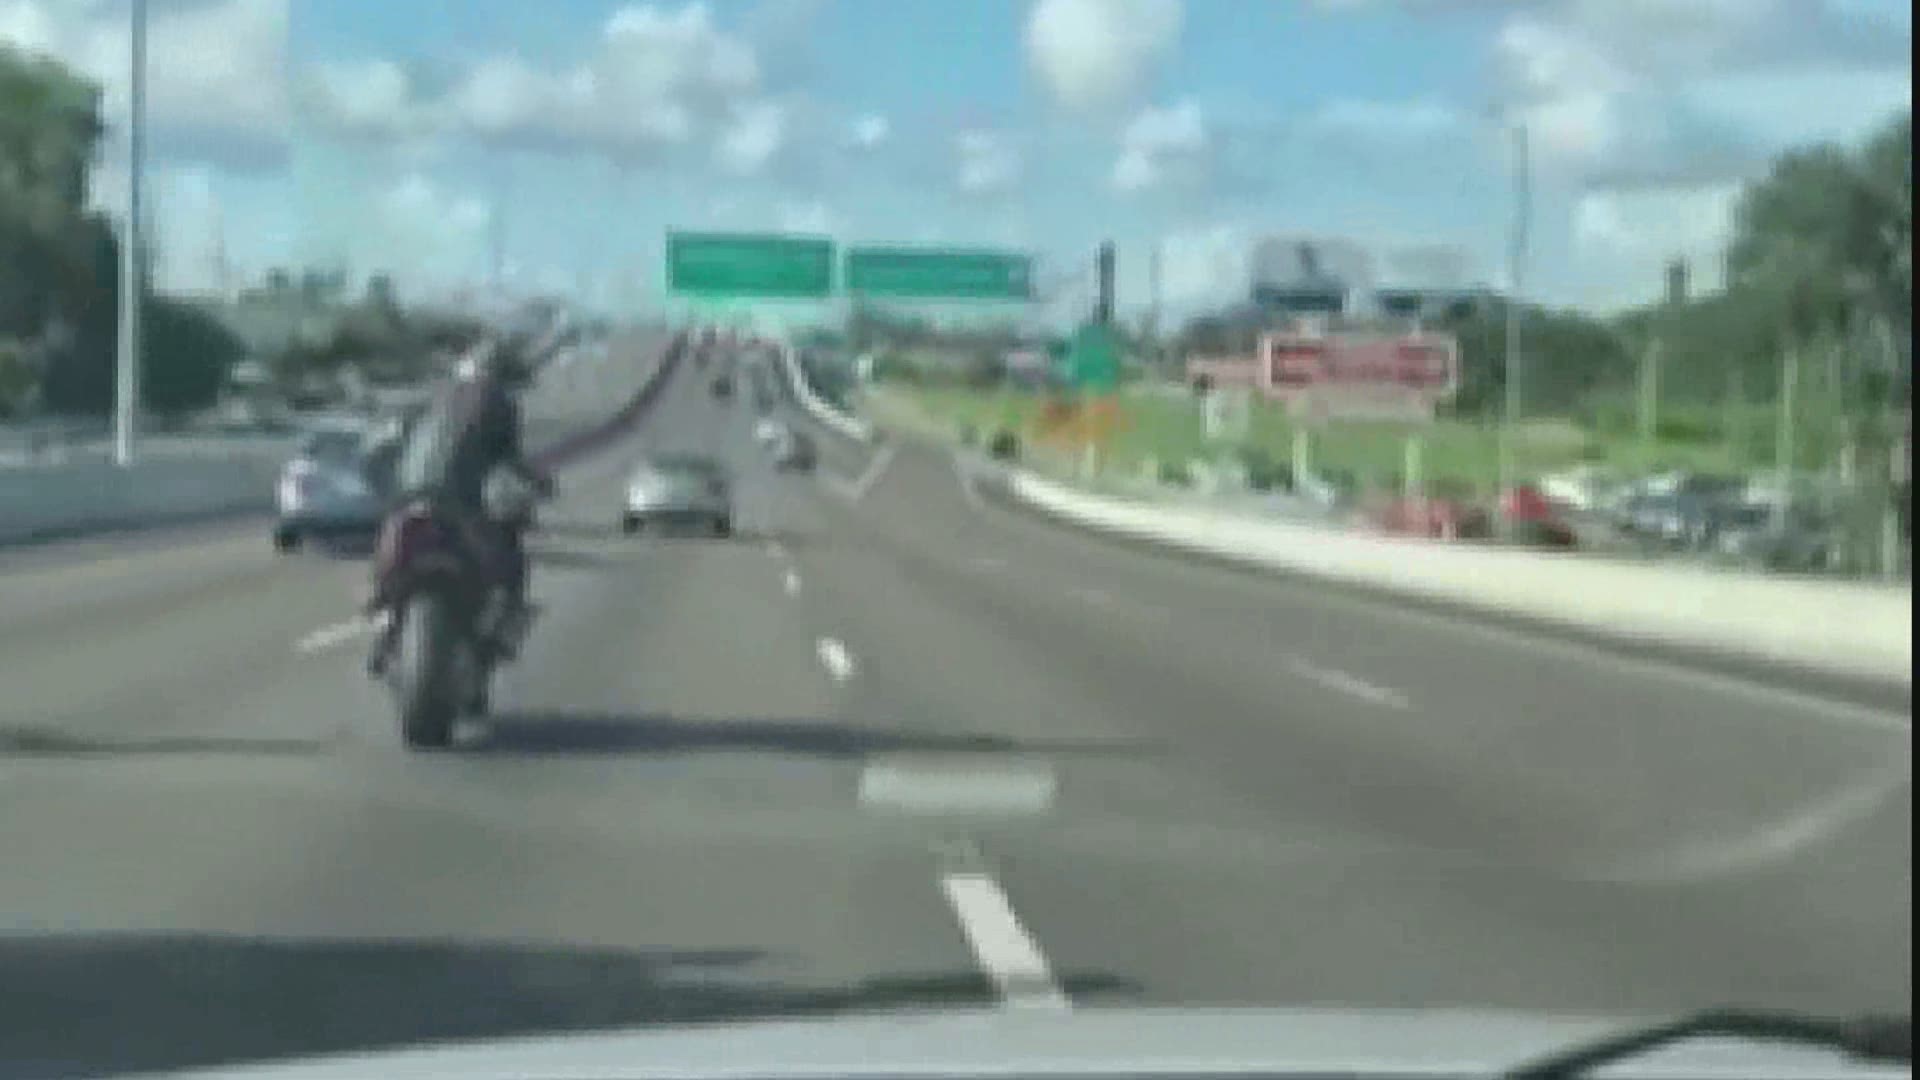 Police caught one motorcyclist doing a wheelie in traffic and another going 156 mph.